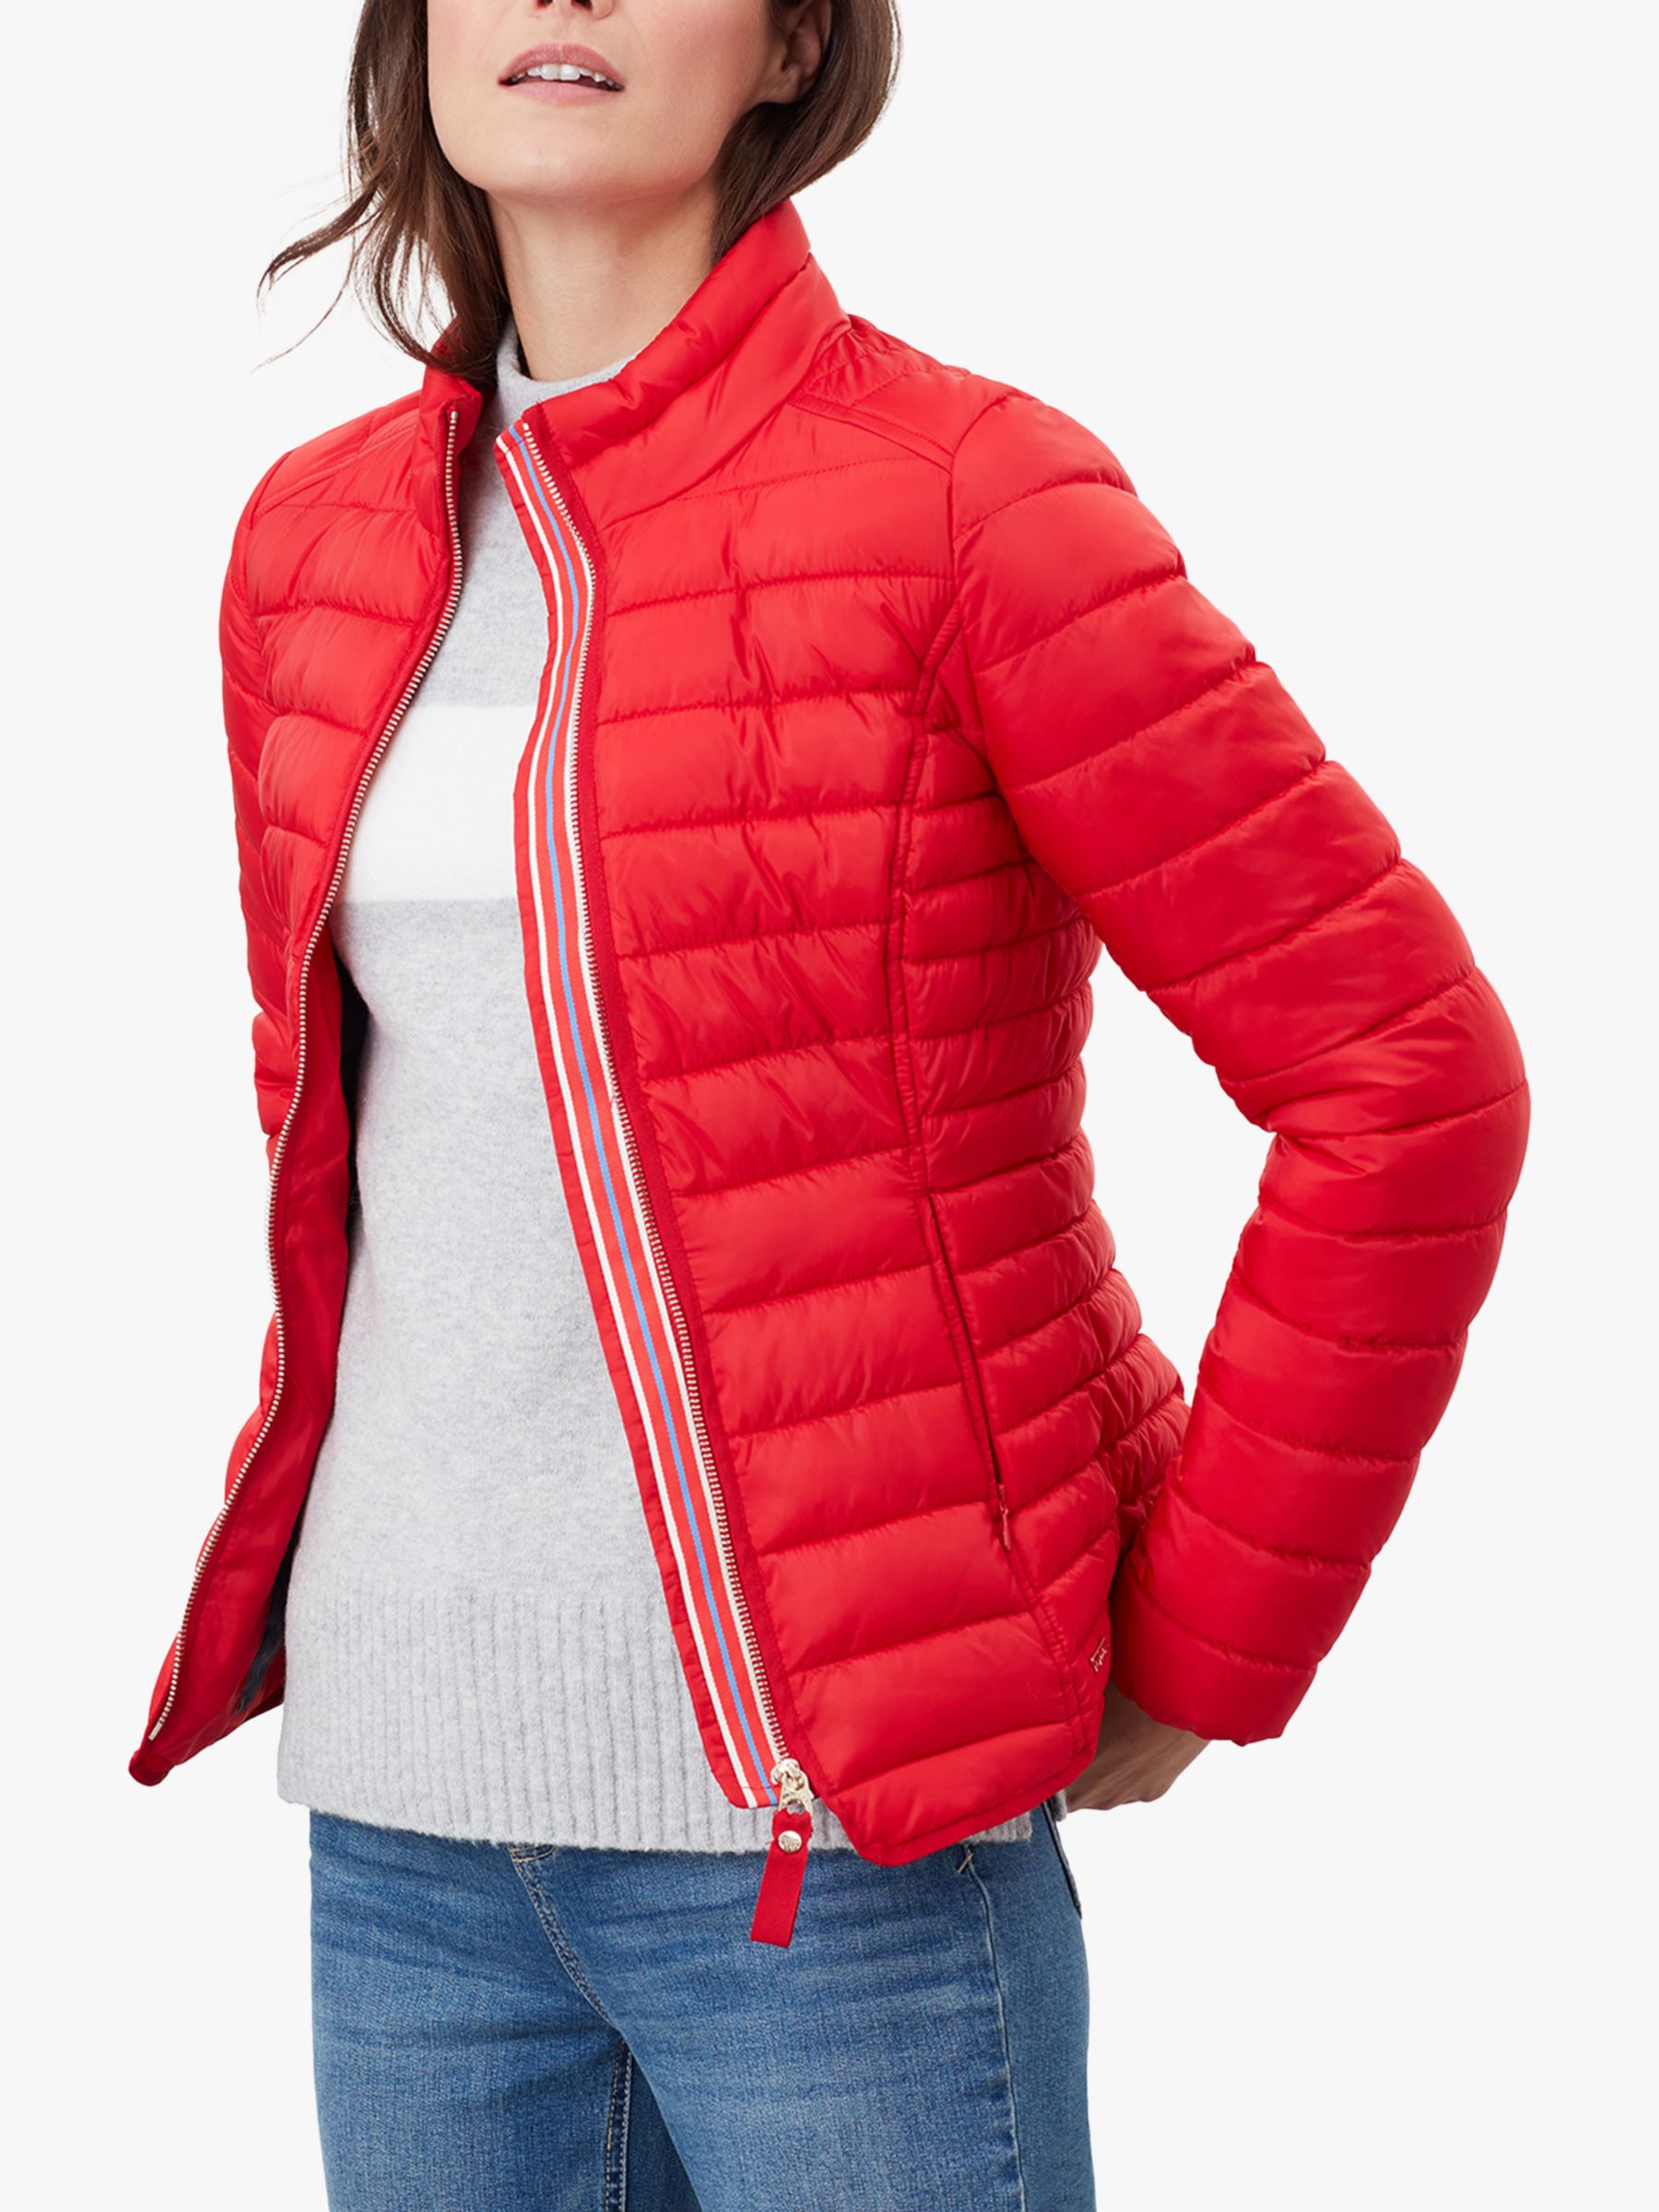 Joules Canterbury Short Luxe Padded Jacket, Red at John Lewis & Partners